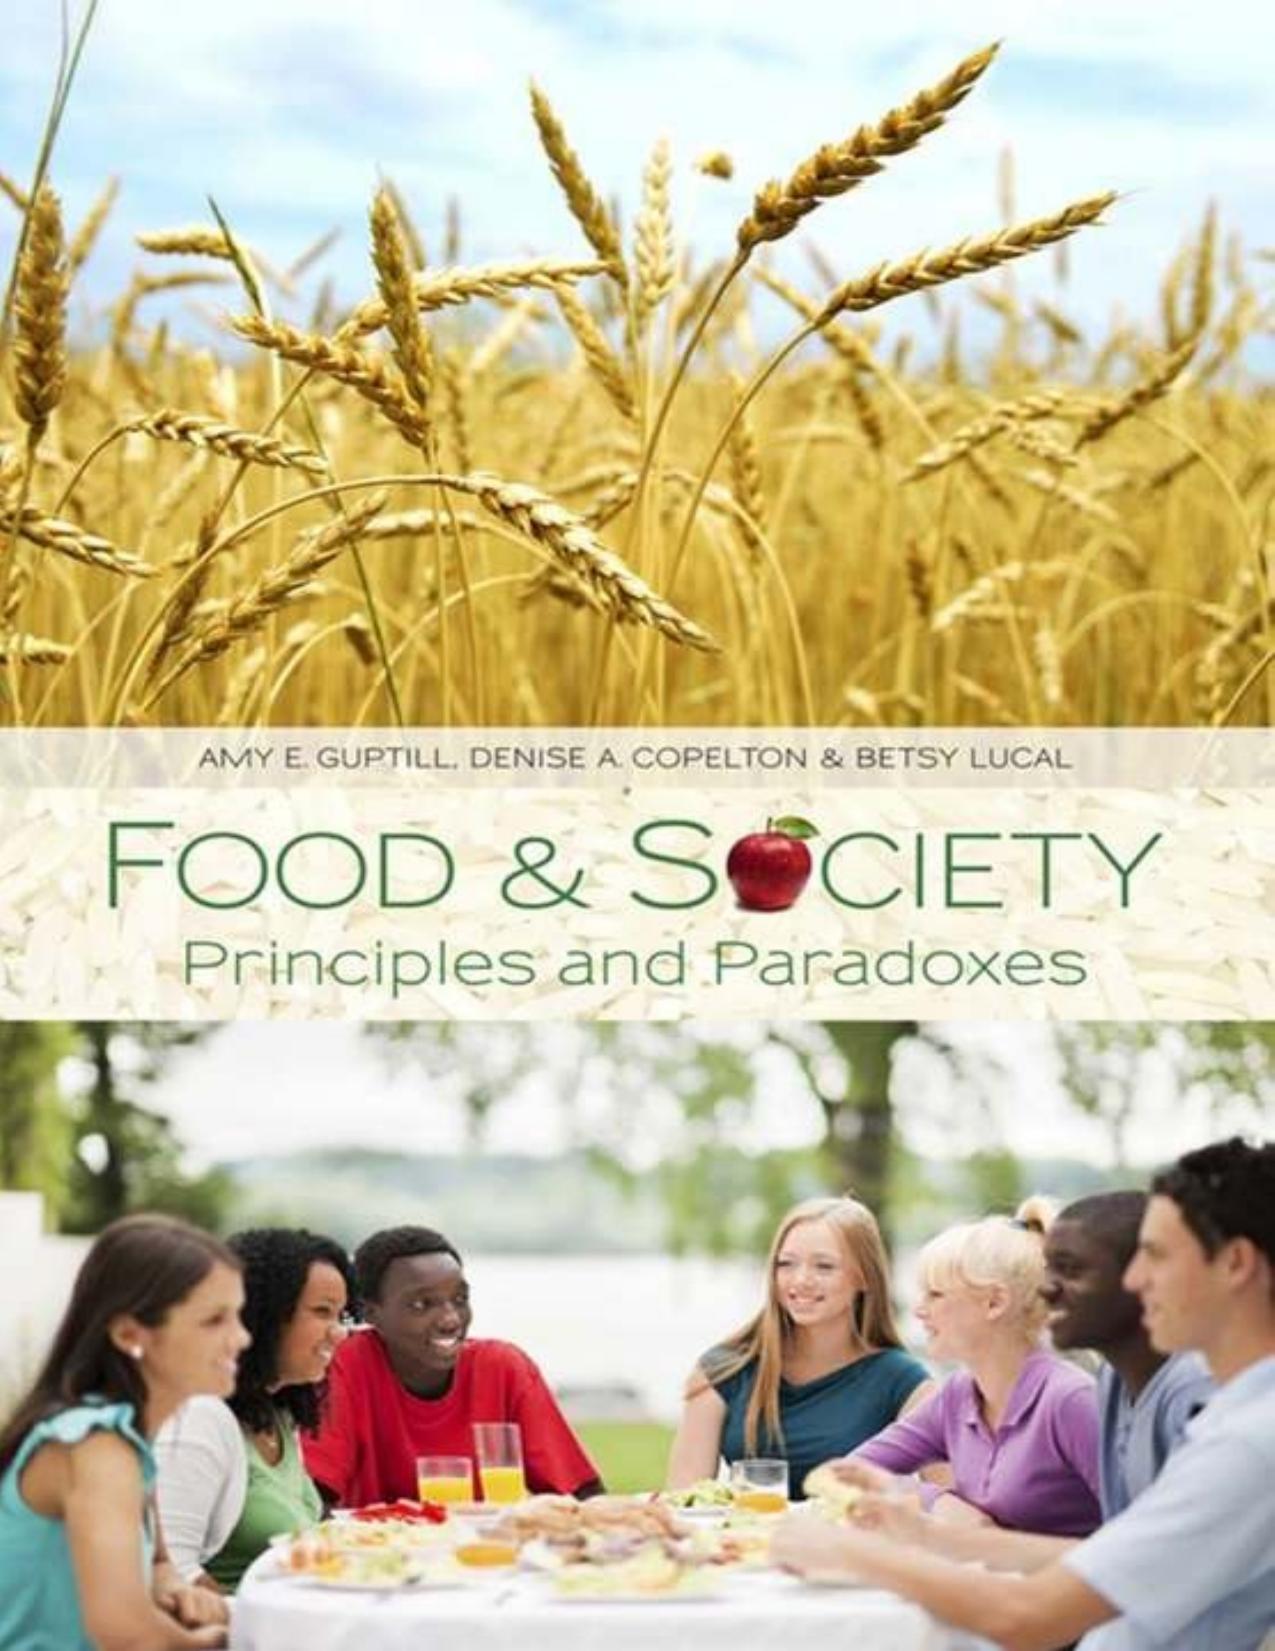 Food and Society Principles and Paradoxes 1st Edition - Amy E. Guptill & Denise A. Copelton & Betsy Lucal.jpg